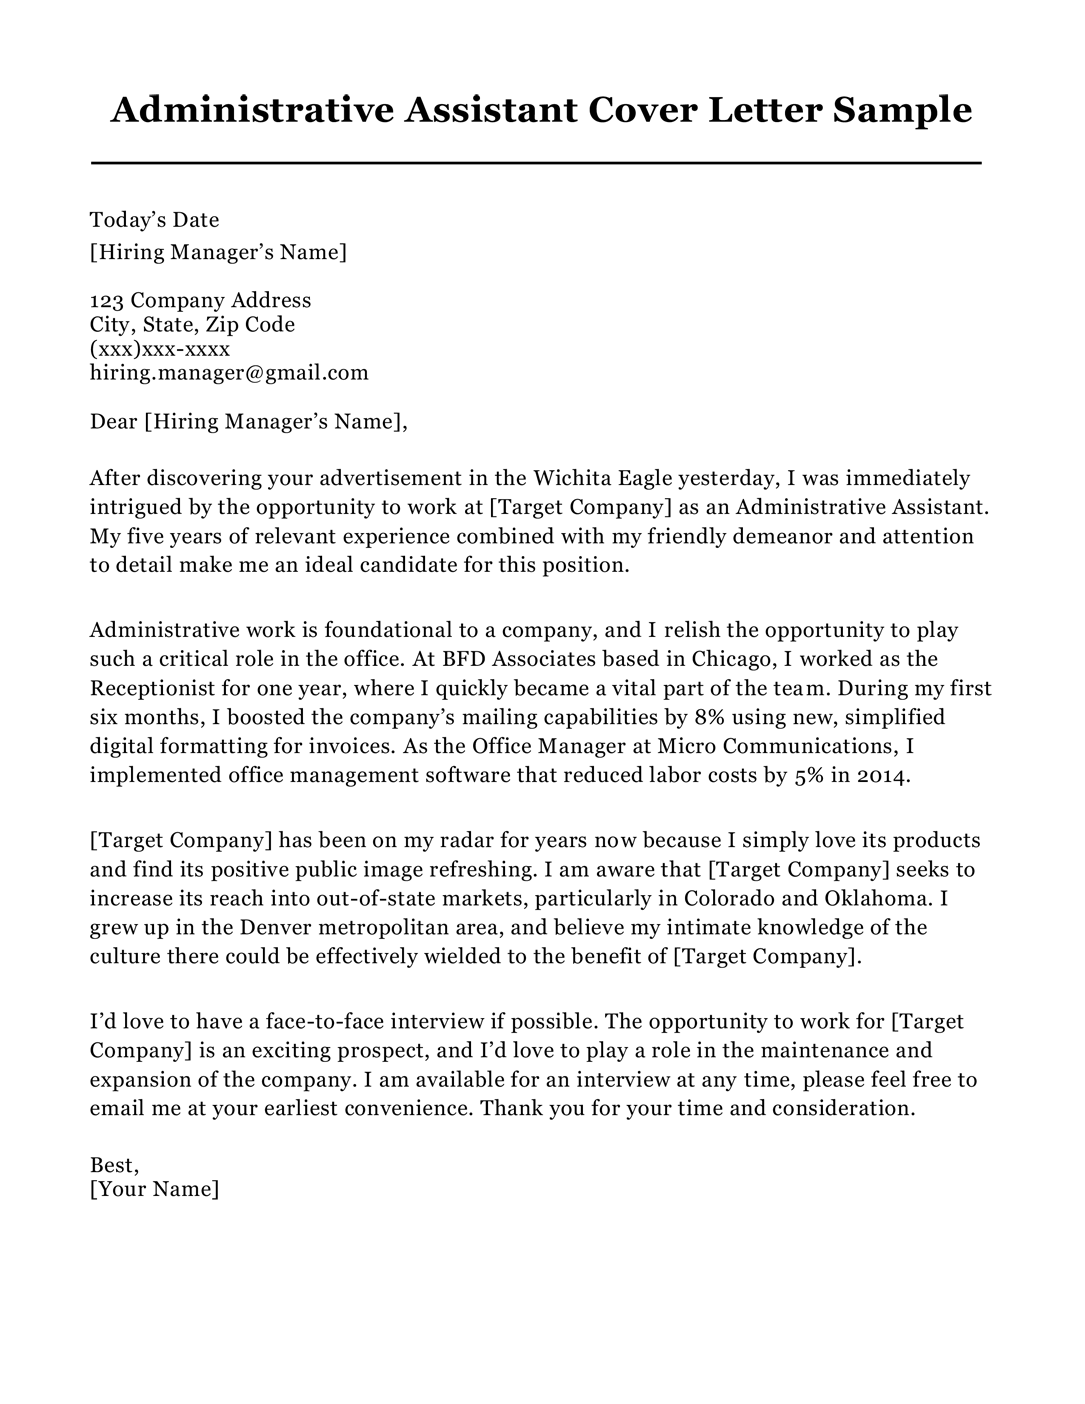 Administration Assistant Cover Letter from resumecompanion.com